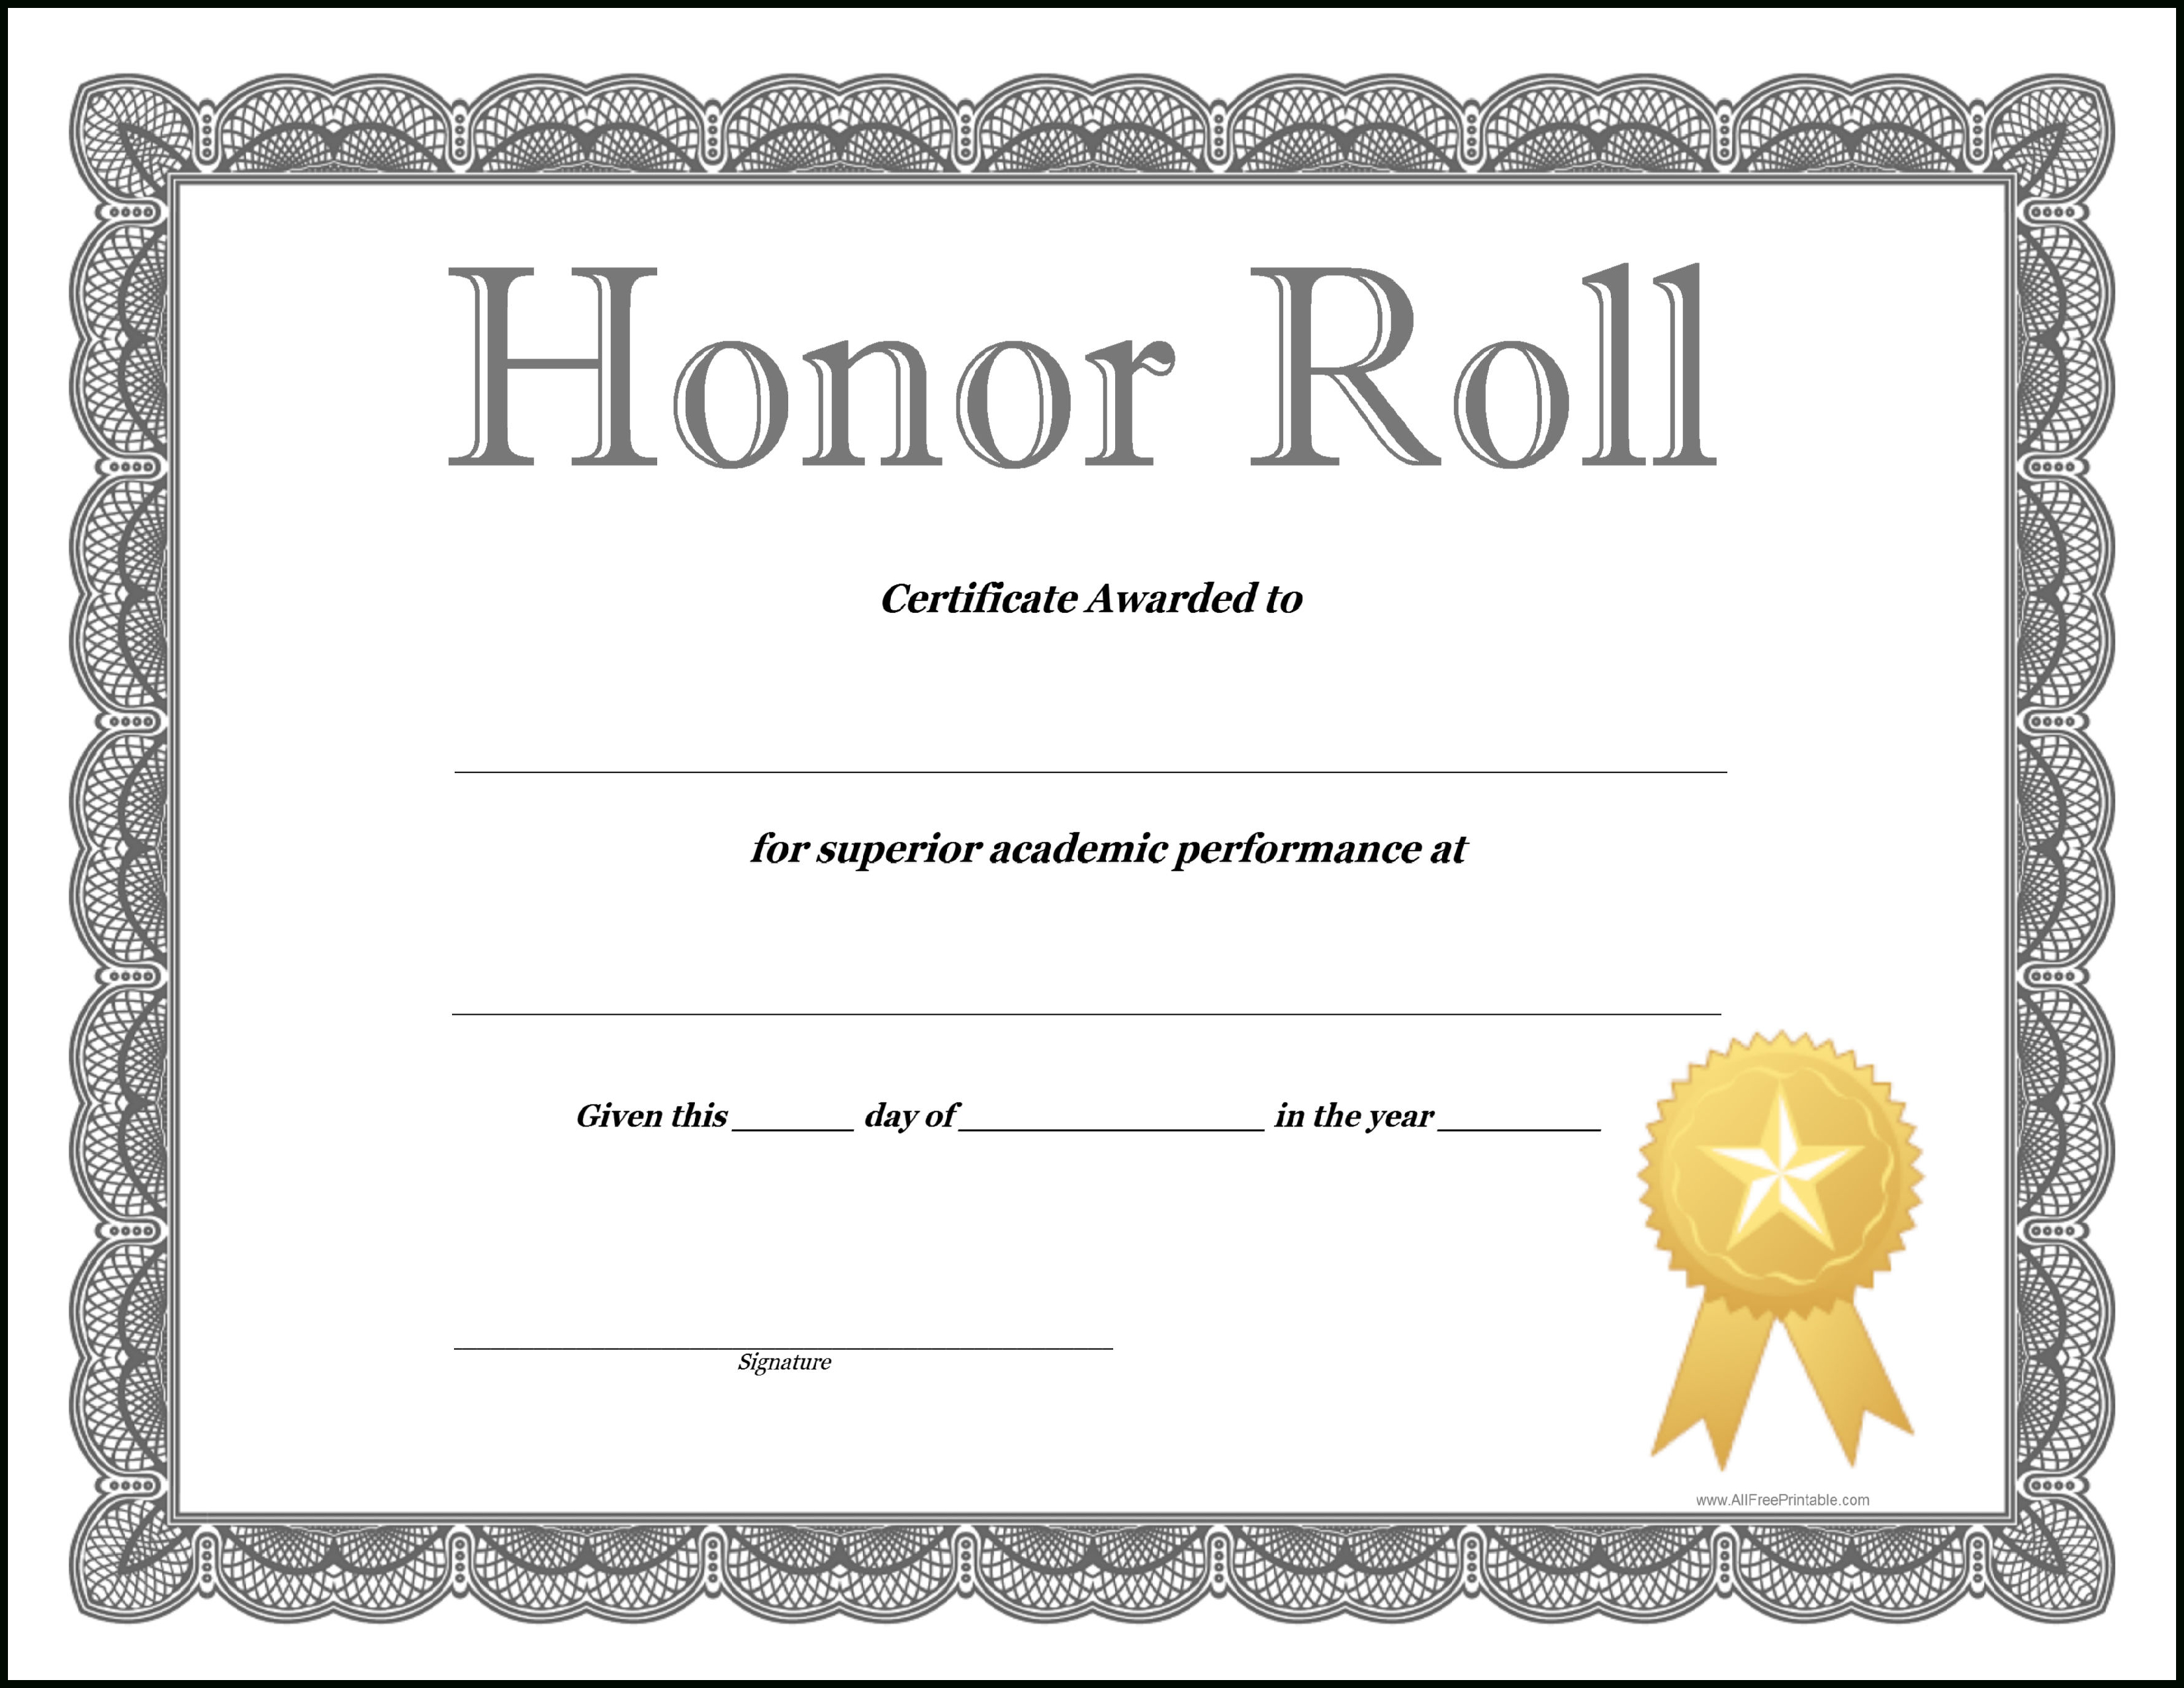 How To Craft A Professional Looking Honor Roll Certificate In Honor Roll Certificate Template